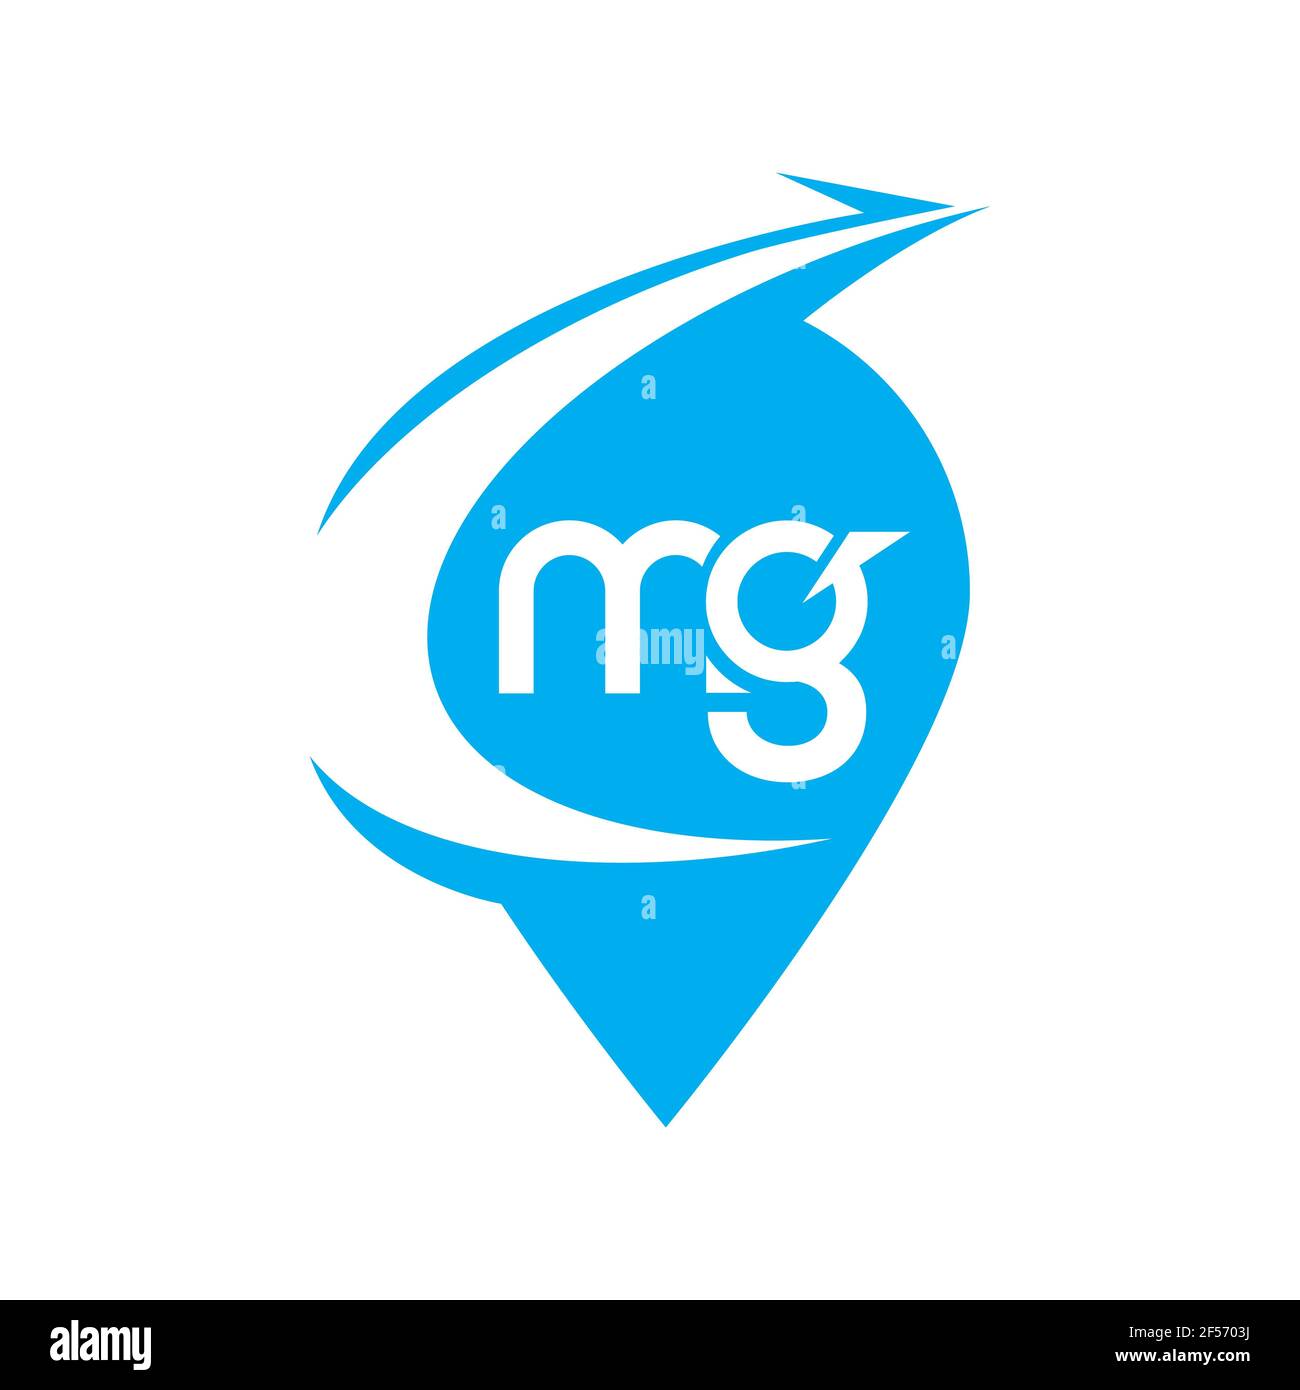 MG Letter Logo Design. Initial letters MG logo icon. Abstract letter MG M G  minimal logo design template. M G letter design vector with black colors  Stock Photo - Alamy